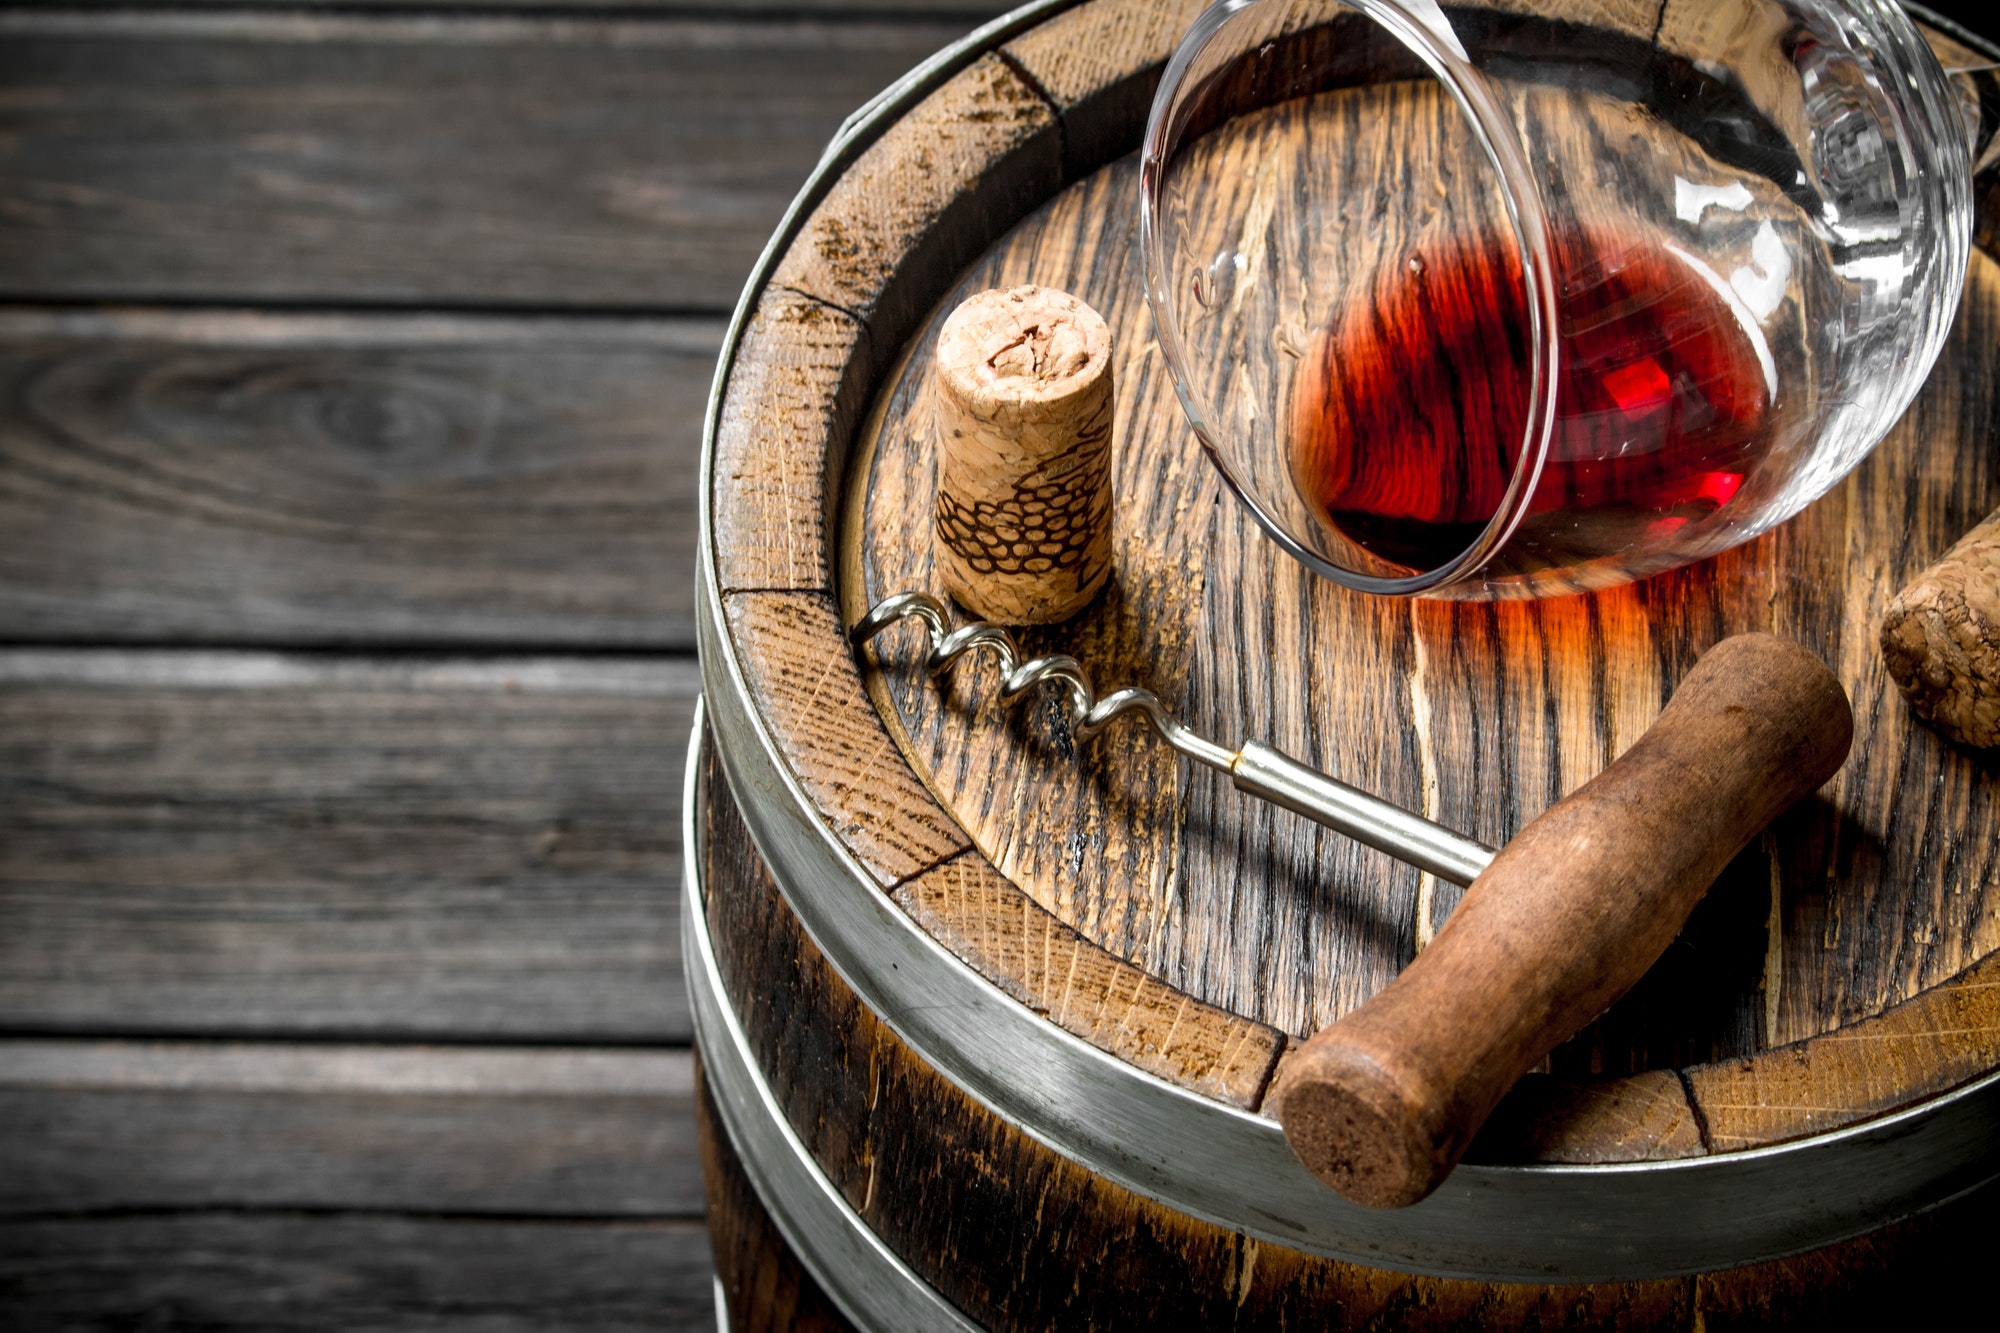 Wine background. A barrel of red wine and a corkscrew.